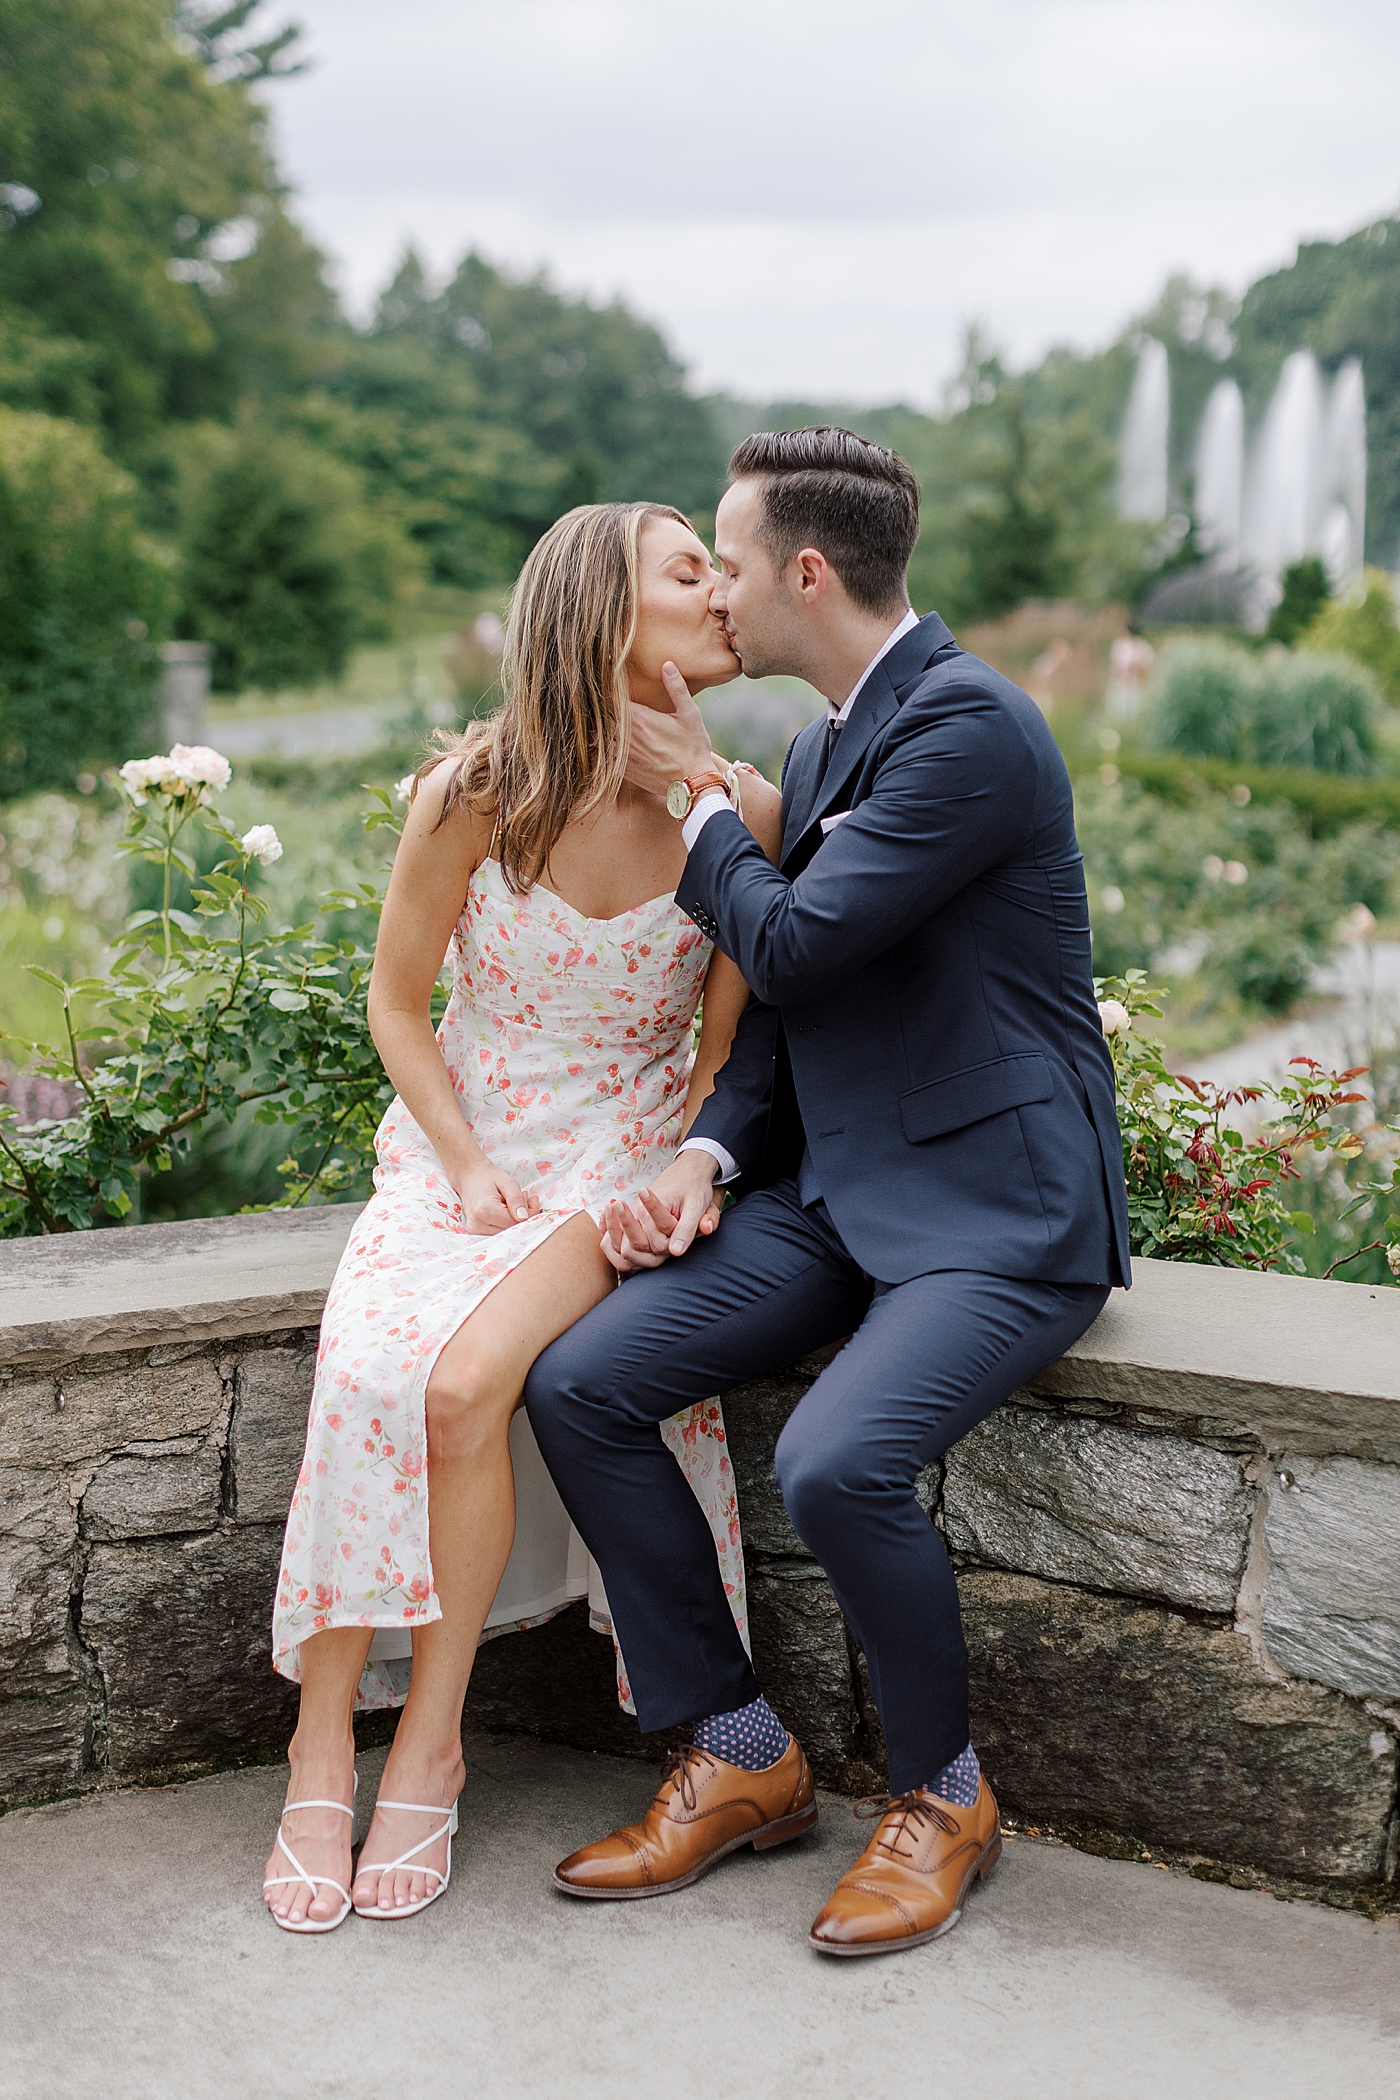 Couple kissing in a park sitting on a bench | Photo by Hope Helmuth Photography